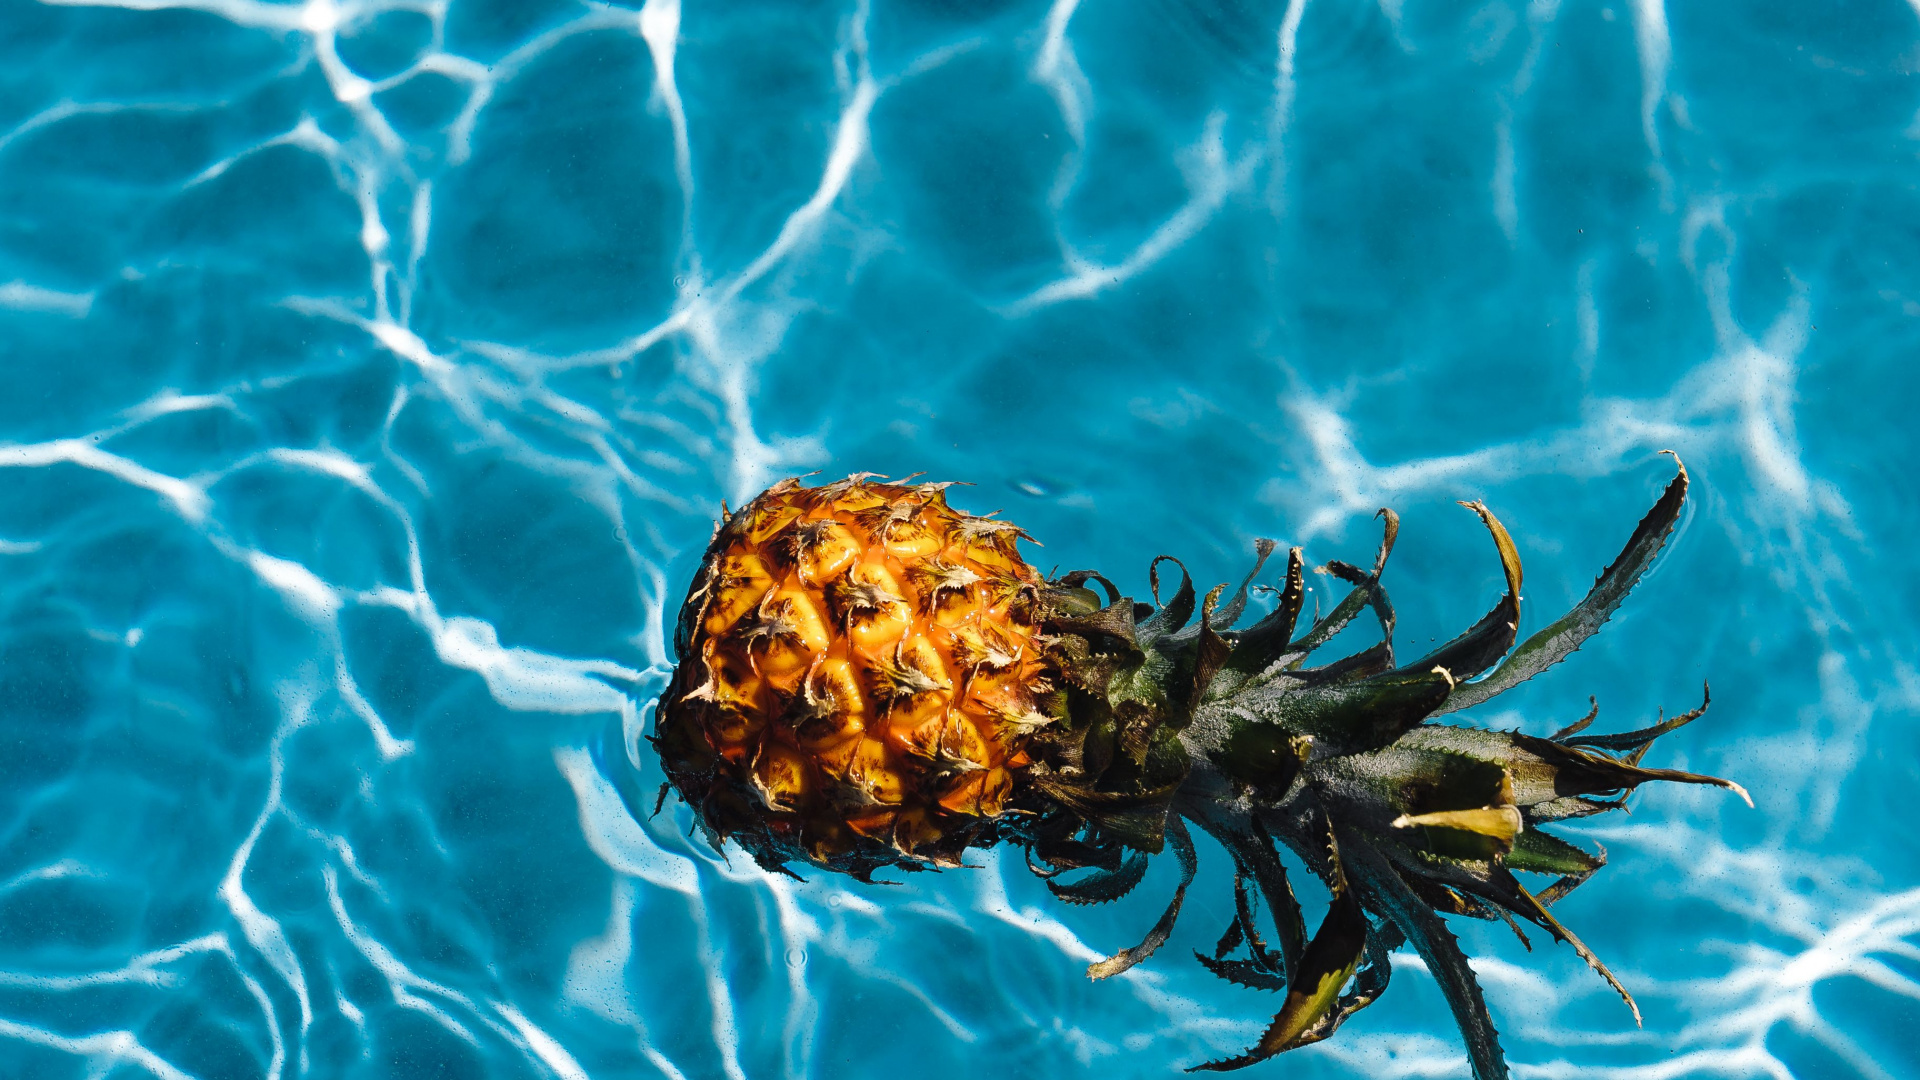 Brown and Green Pineapple Floating on Water. Wallpaper in 1920x1080 Resolution